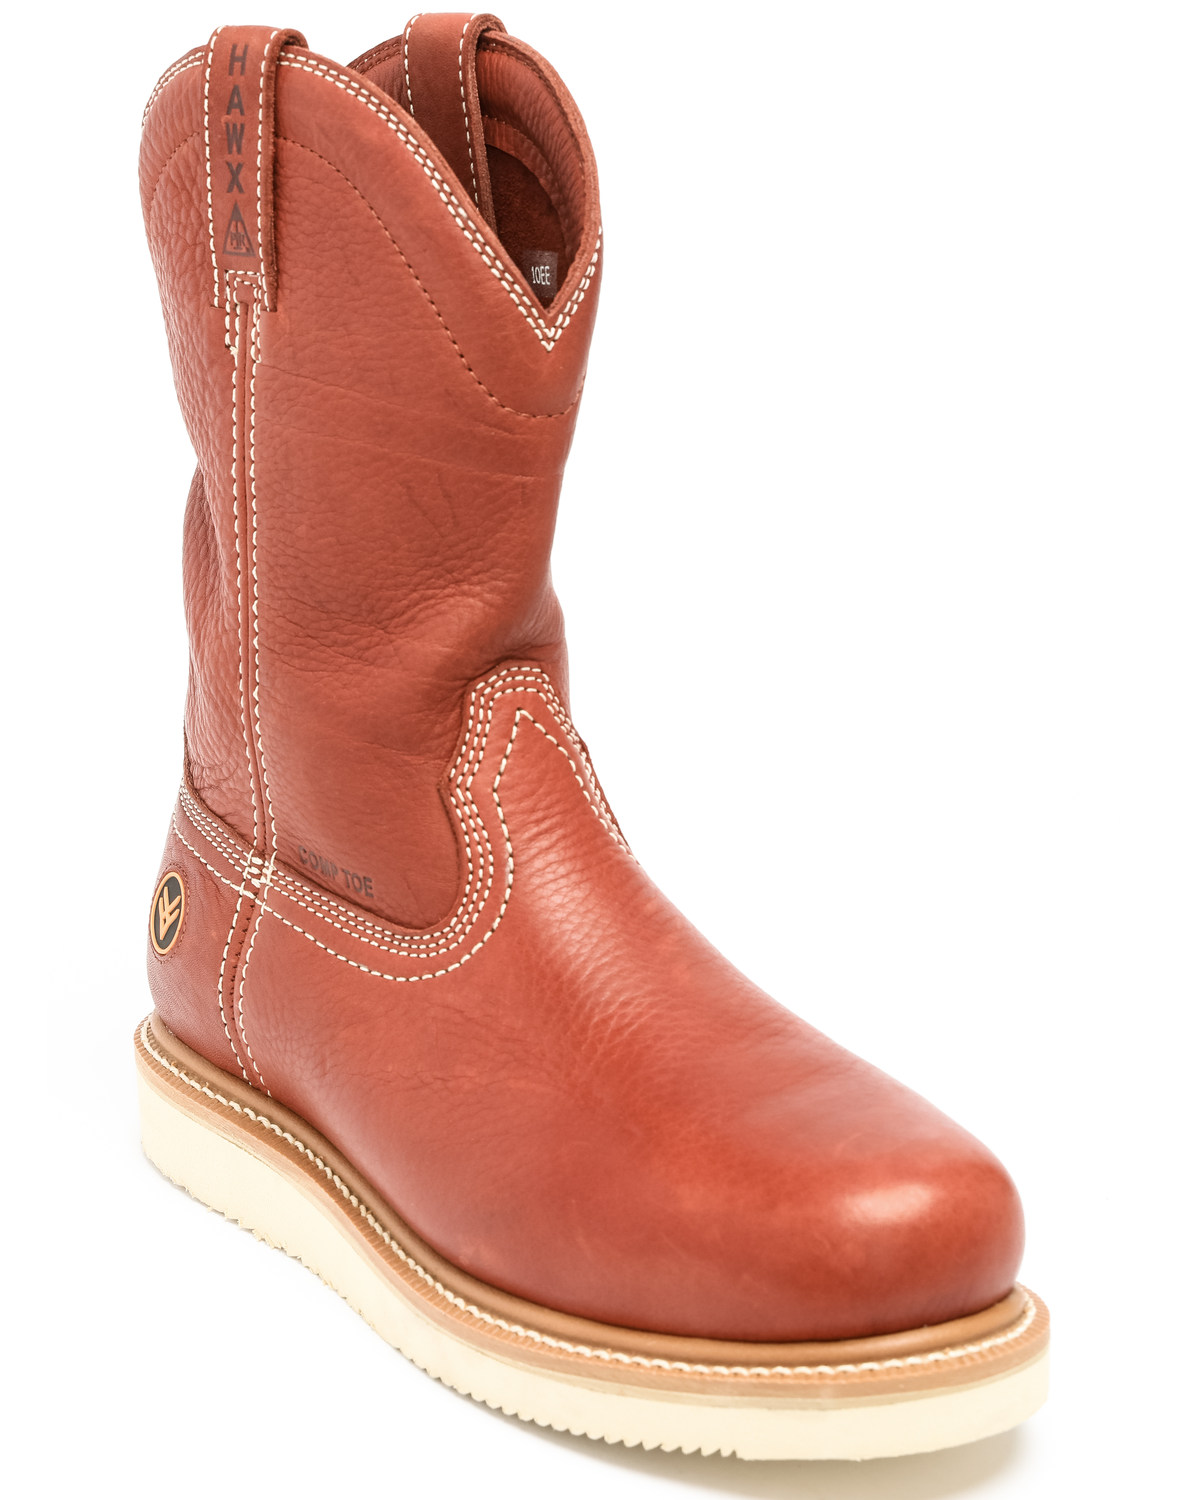 pull on wedge work boots